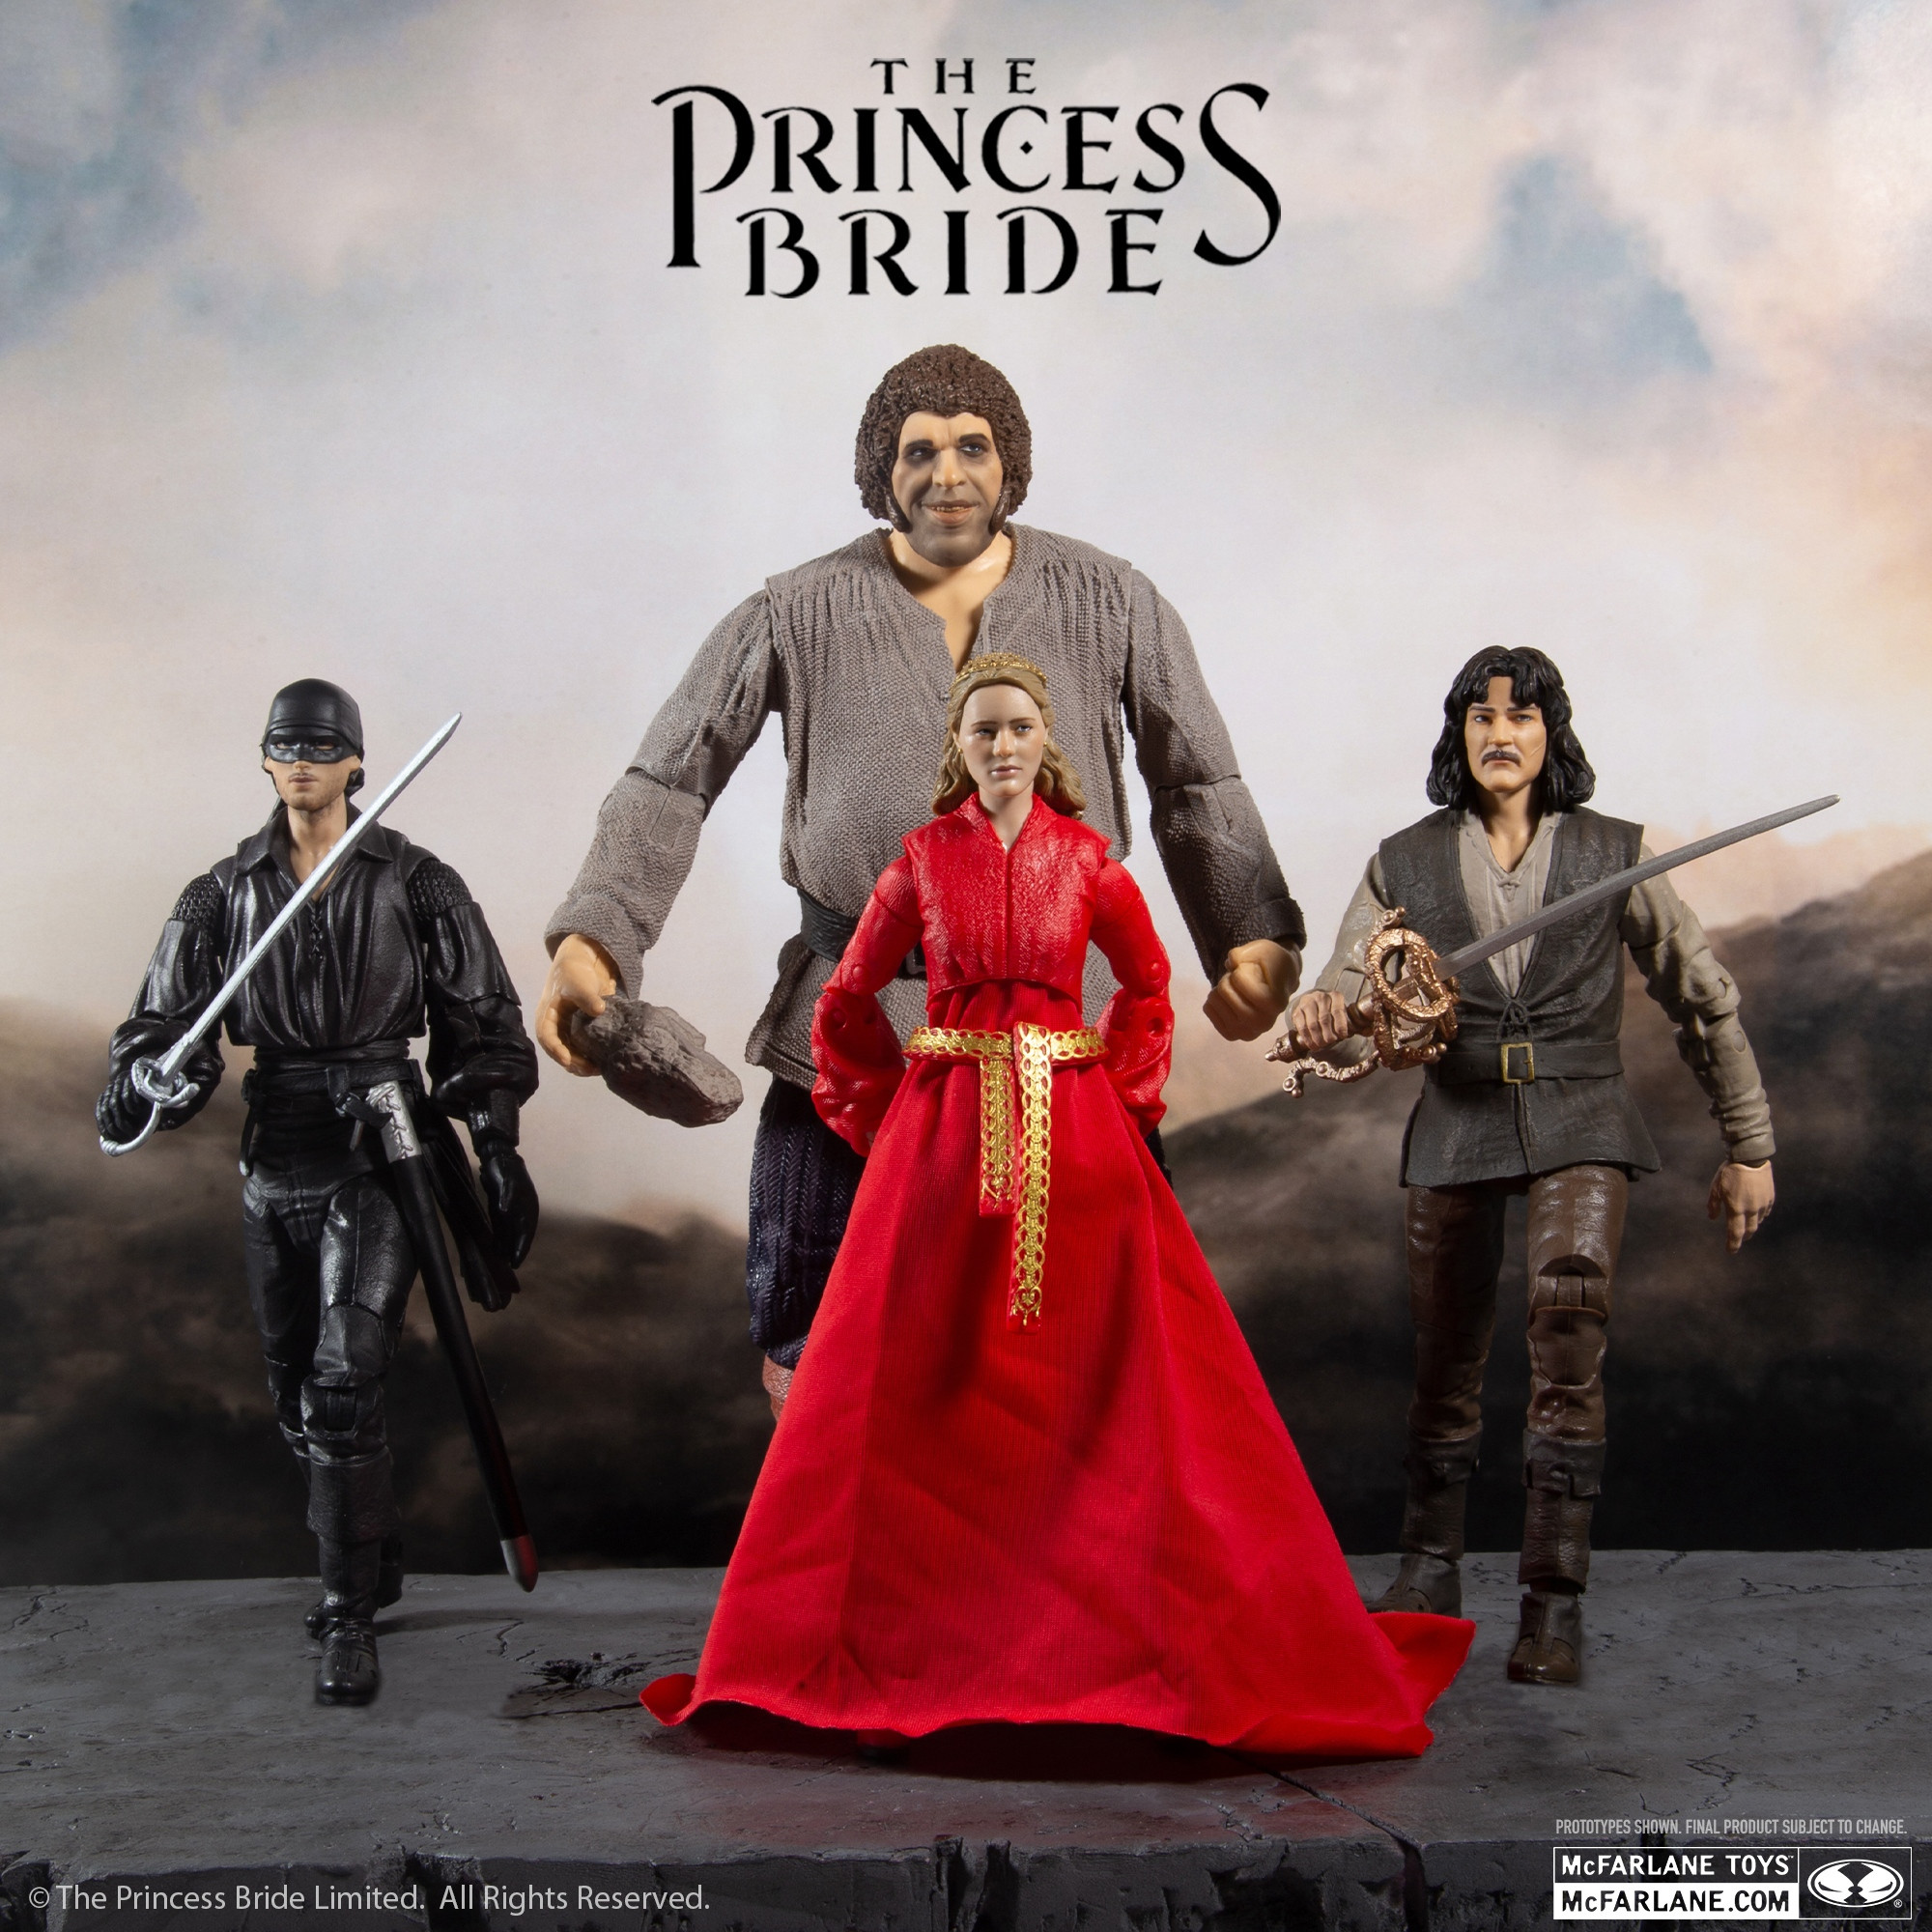 Princess Bride - Fezzik, Princess Buttercup and Inigo Montoya - Engineering, Joint Articulation and Revisions for Fezzik and Princess. Minor revision work on Inigo.